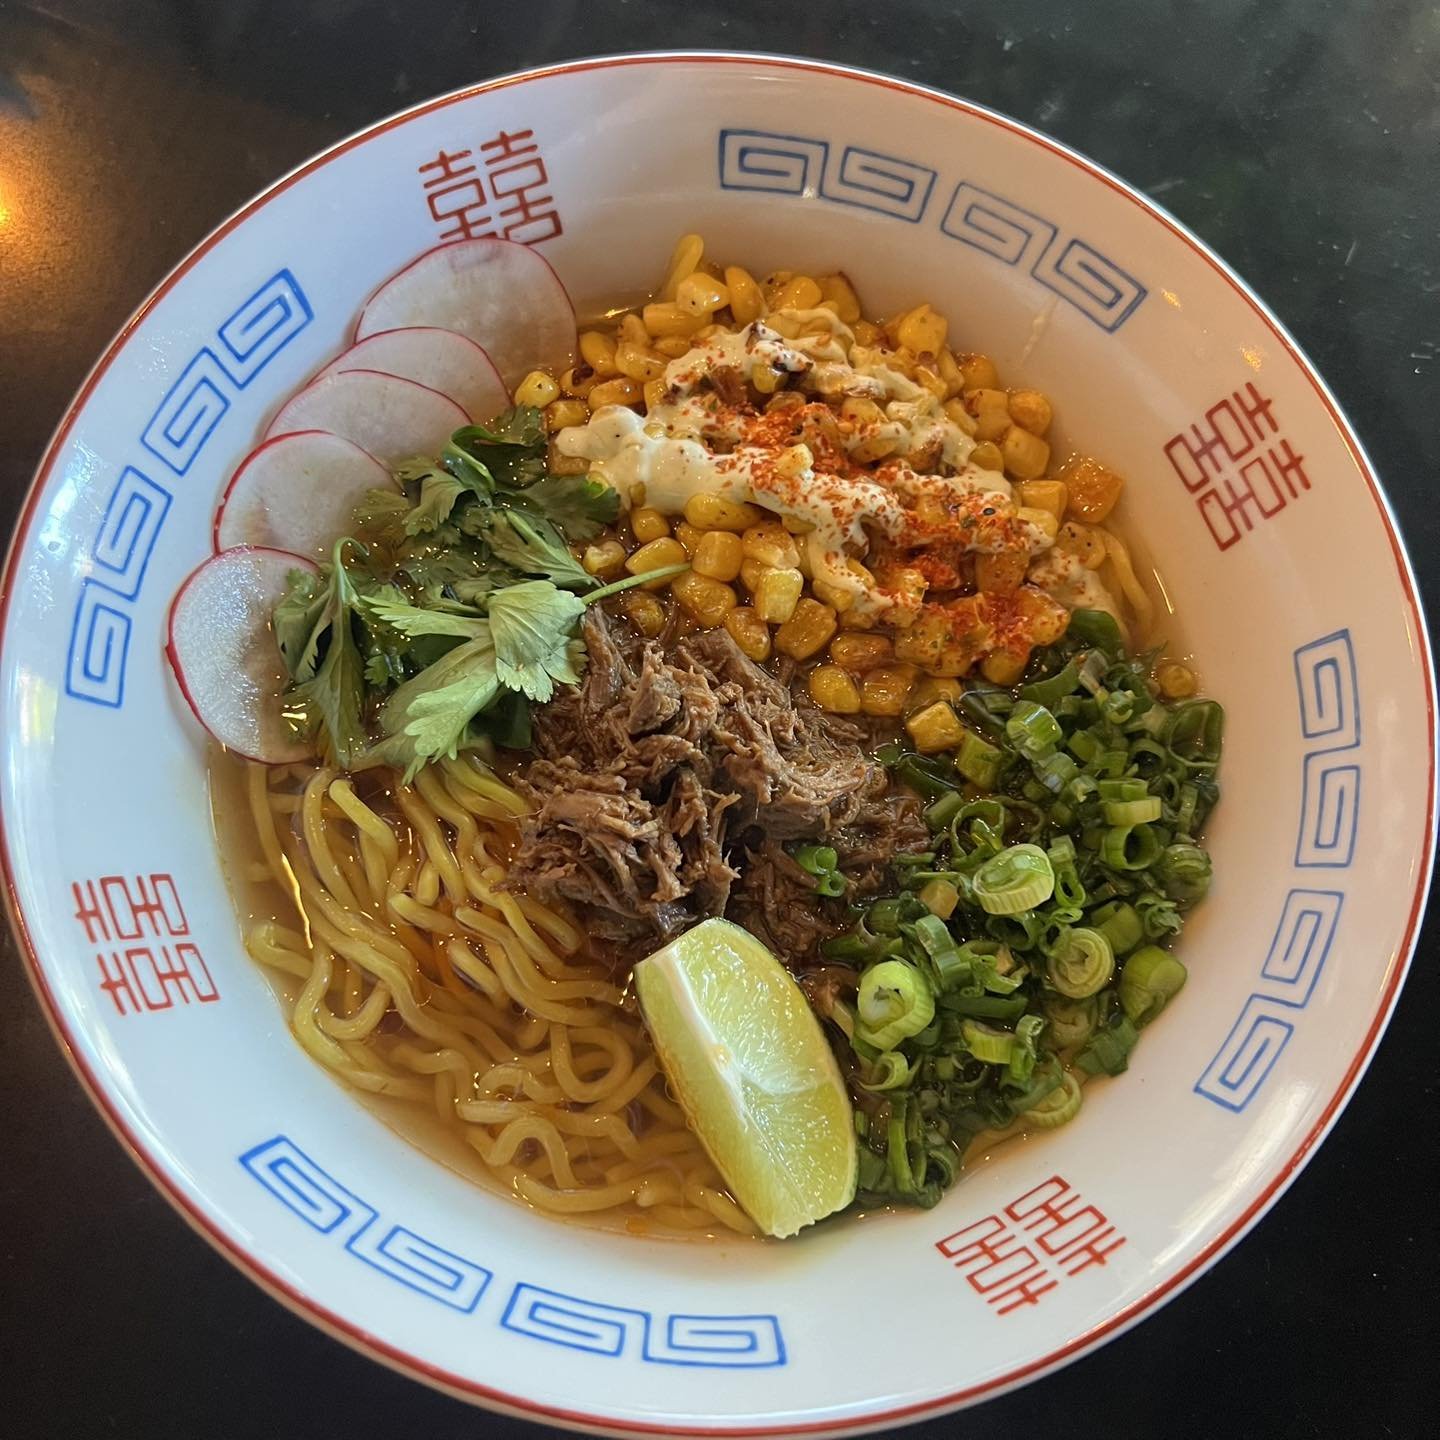 That&rsquo;s right !!! Birria shio ramen - beef consomm&eacute; broth and shio tare served with thicc noodles and tender slow cooked beef, topped with roasted corn, pickled radish, chili oil, and a cilantro lime crema. Perfect for a sunny day :)

#bi